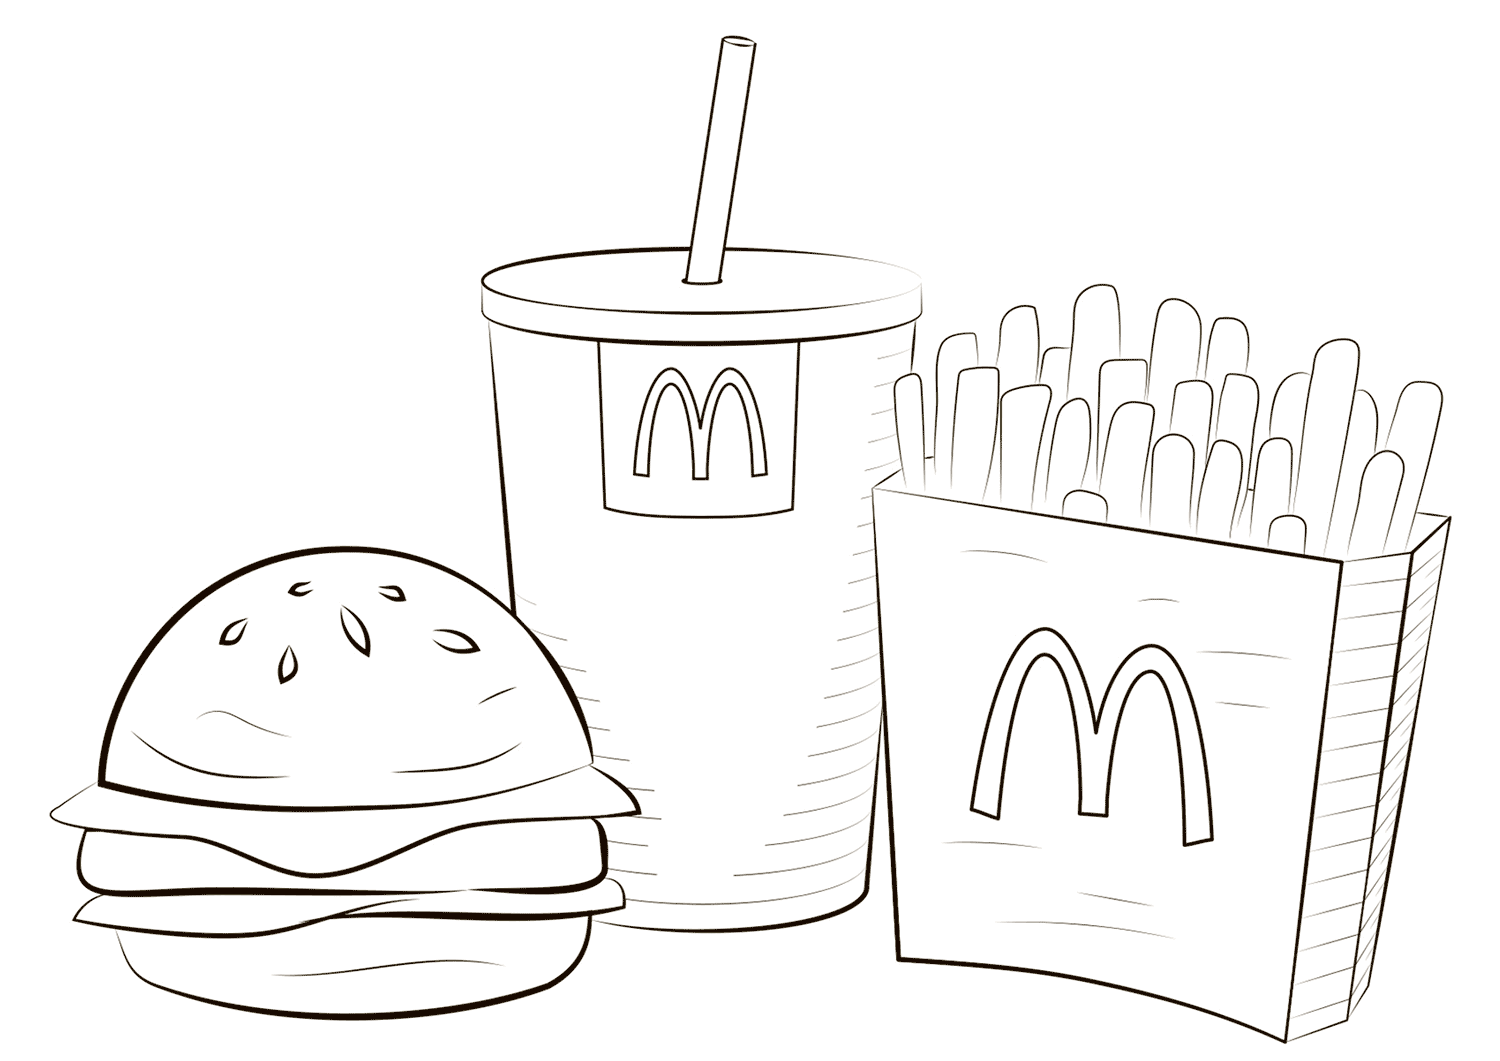 McDonald Food Coloring Page   Free Printable Coloring Pages for Kids